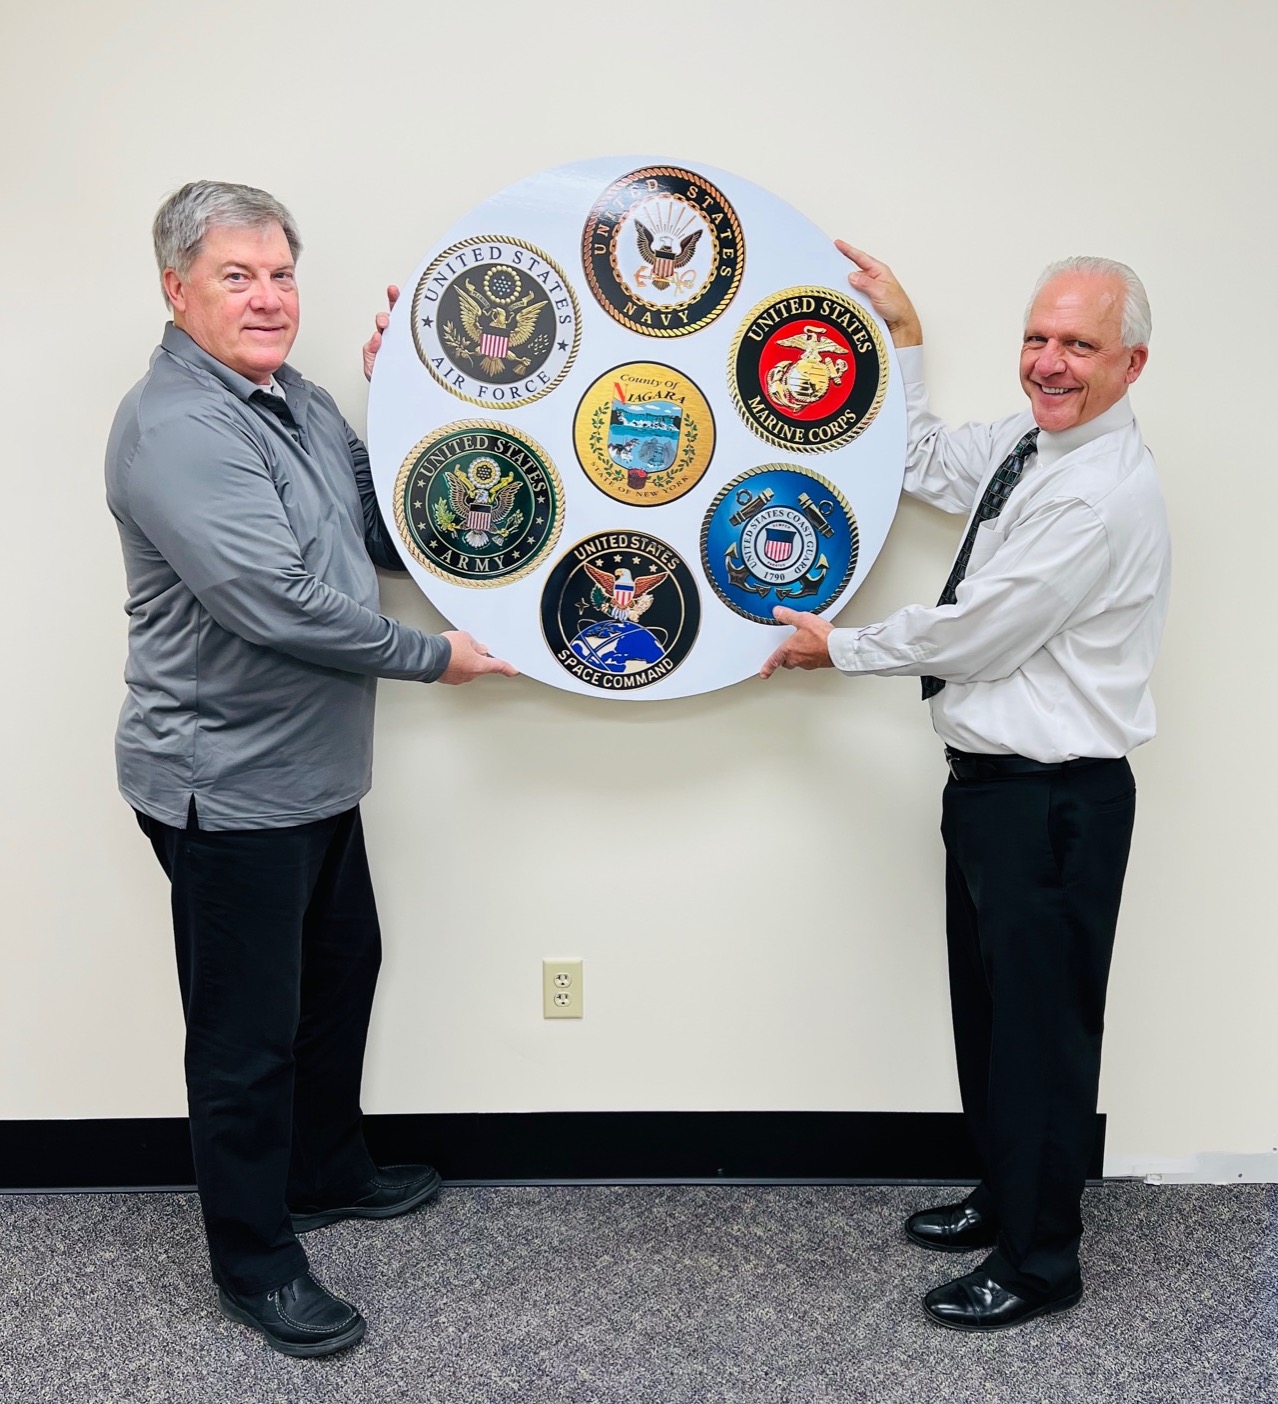 Niagara County Veterans' Service Agency Director Jeff Glatz and Niagara County Clerk Joseph A. Jastrzemski hang the sign for the agency at its new location in the Niagara County Courthouse, 175 Hawley St., Lockport.